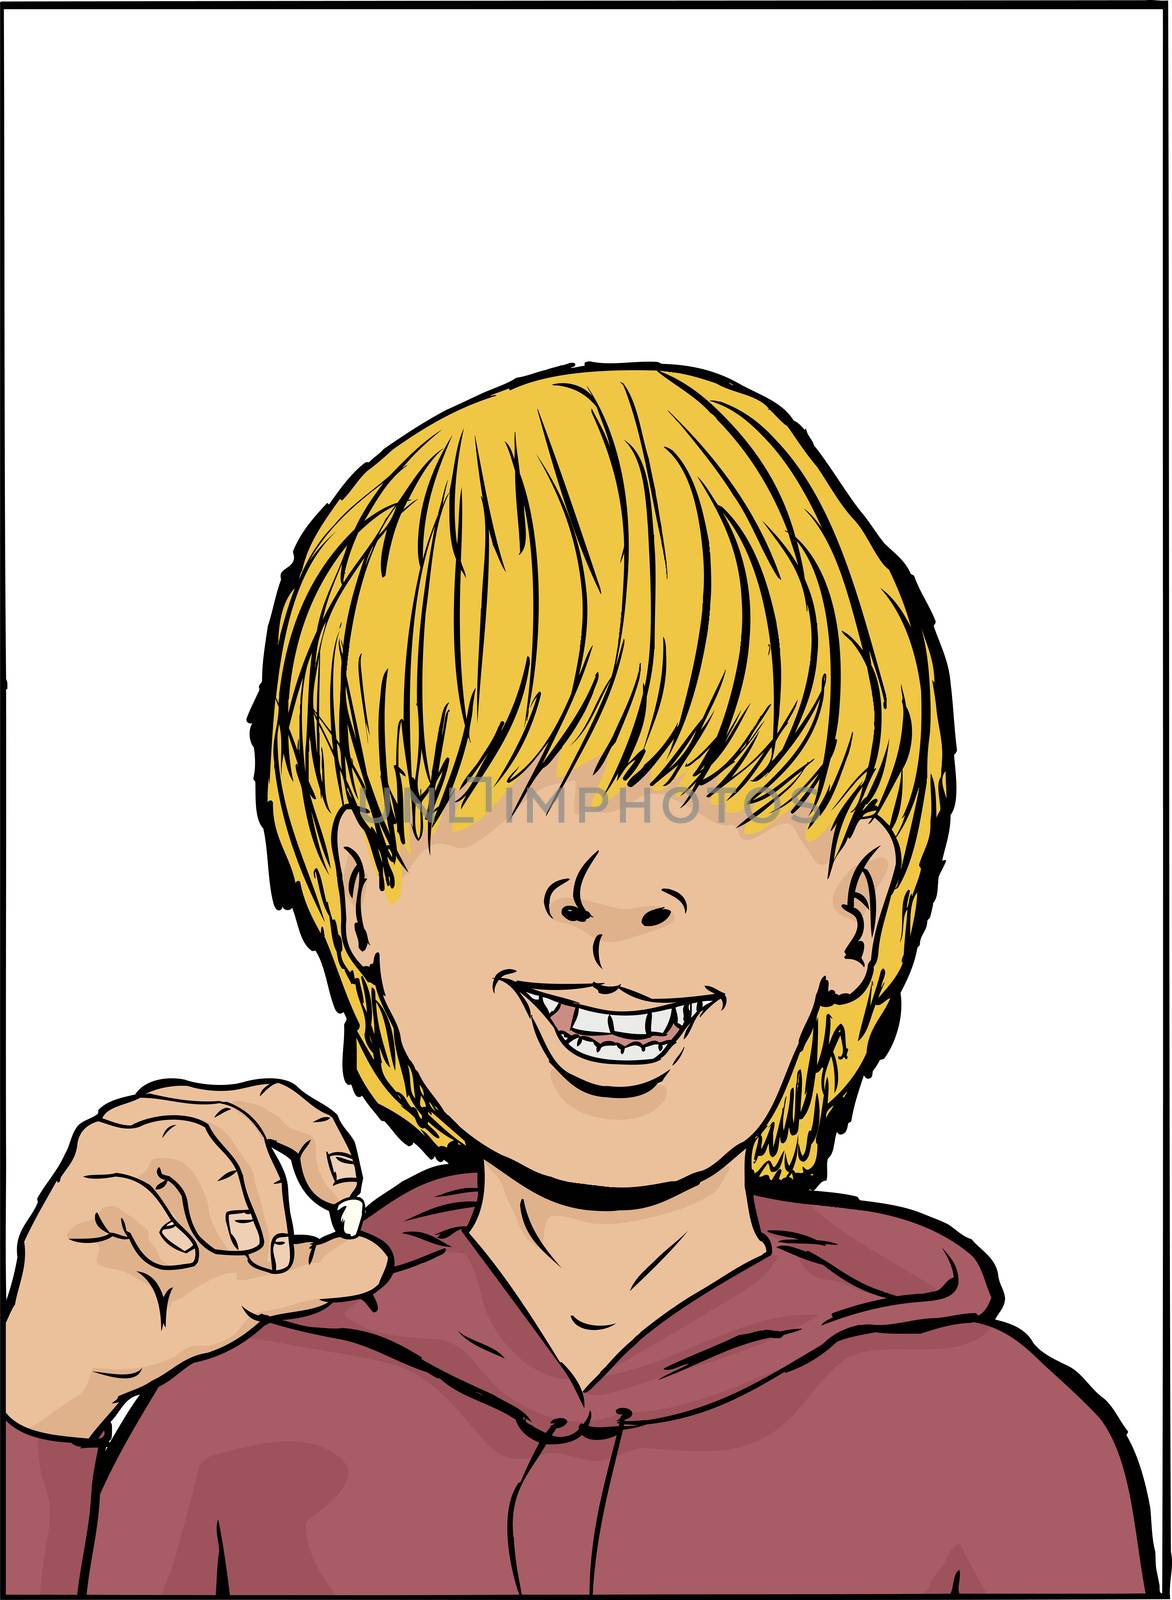 Grinning blond male child in sweatshirt holding tooth